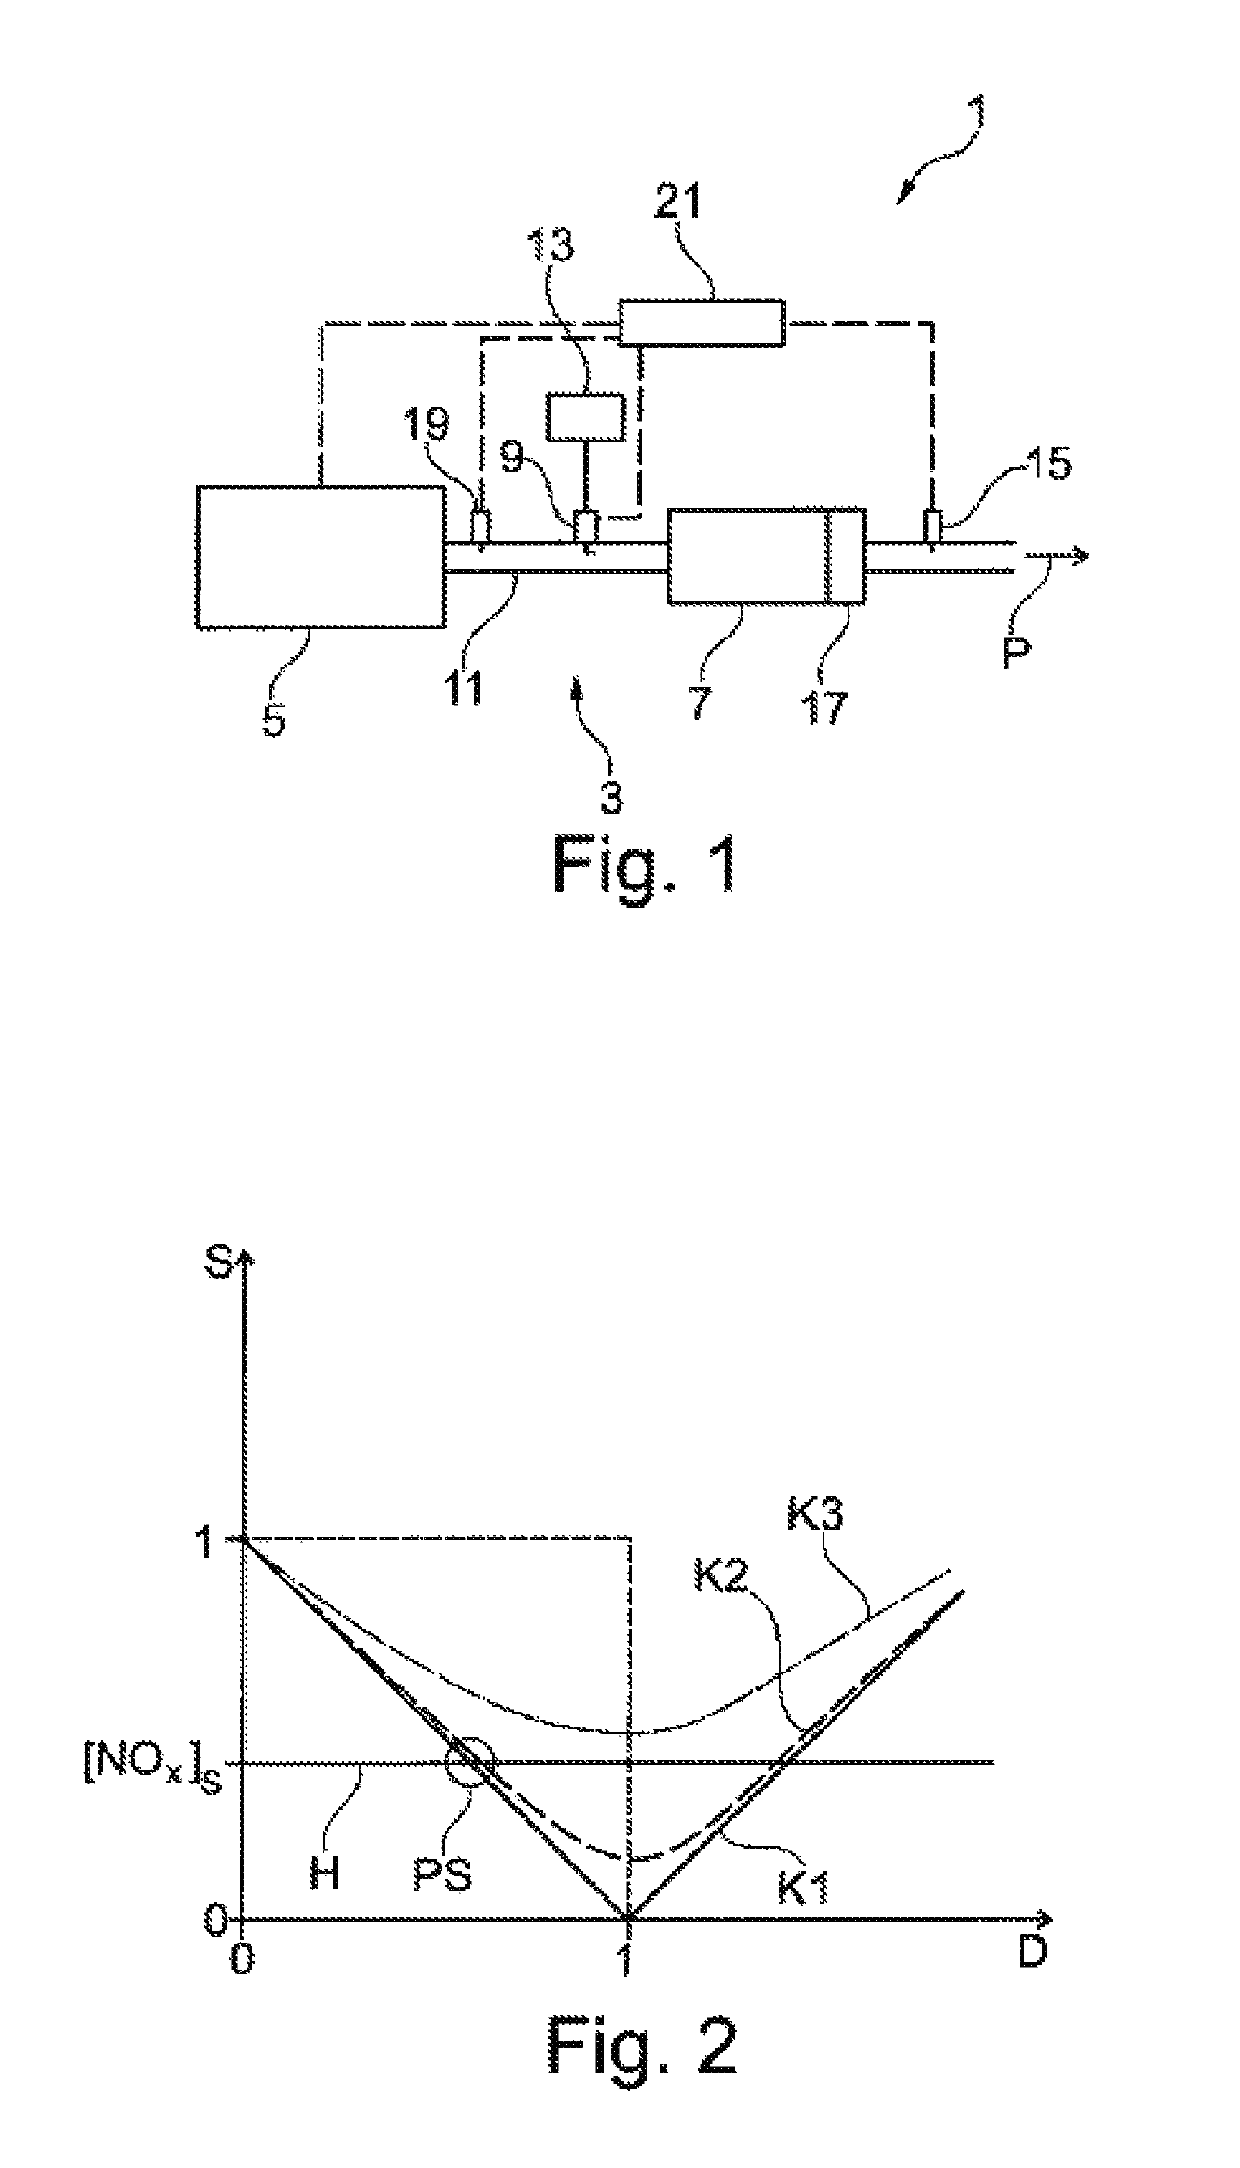 Method for operating an exhaust after-treatment system comprising an SCR-catalyst